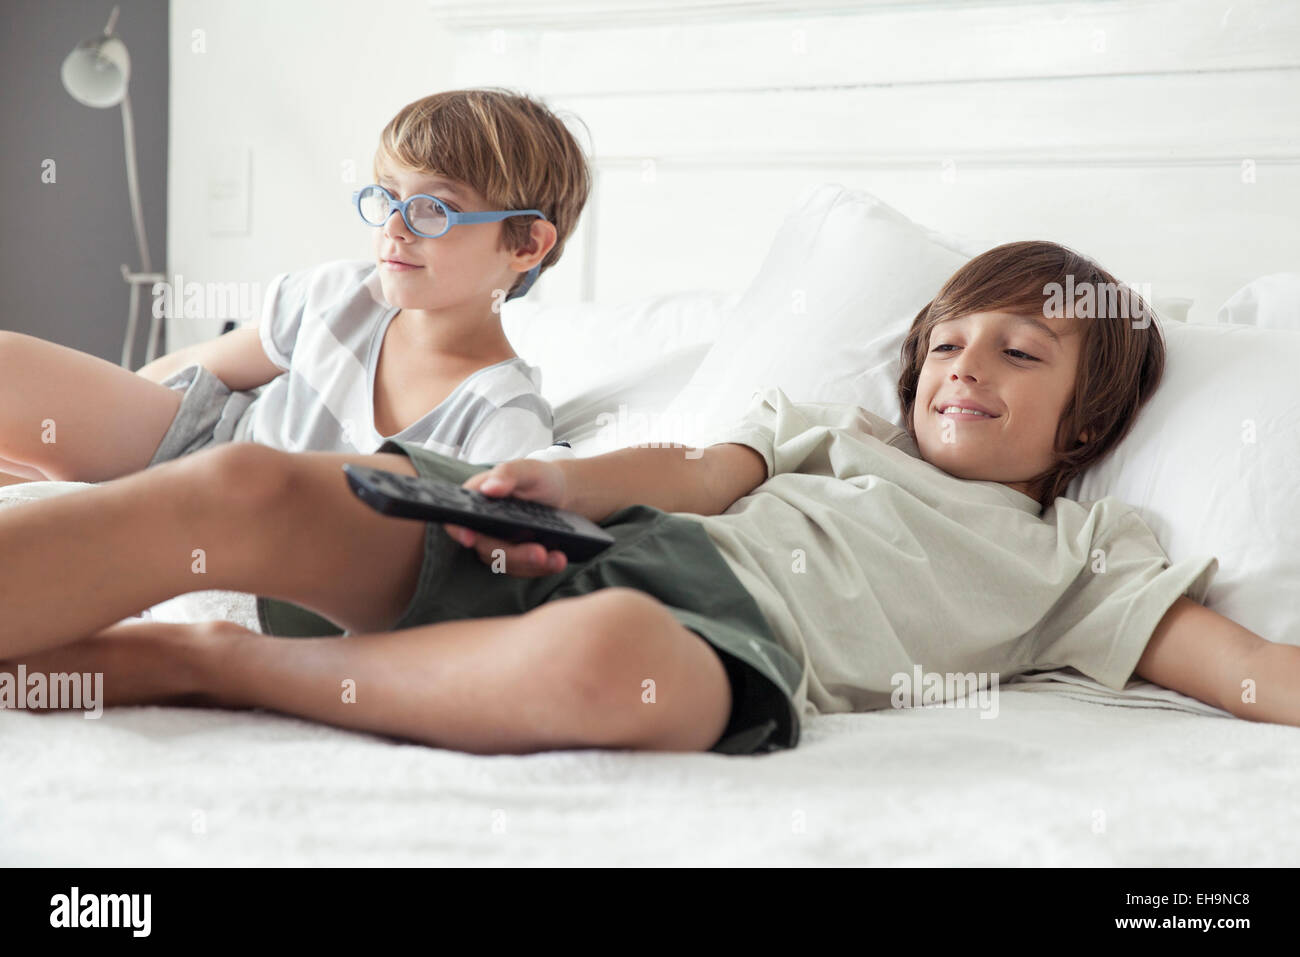 Boys watching TV on bed Stock Photo